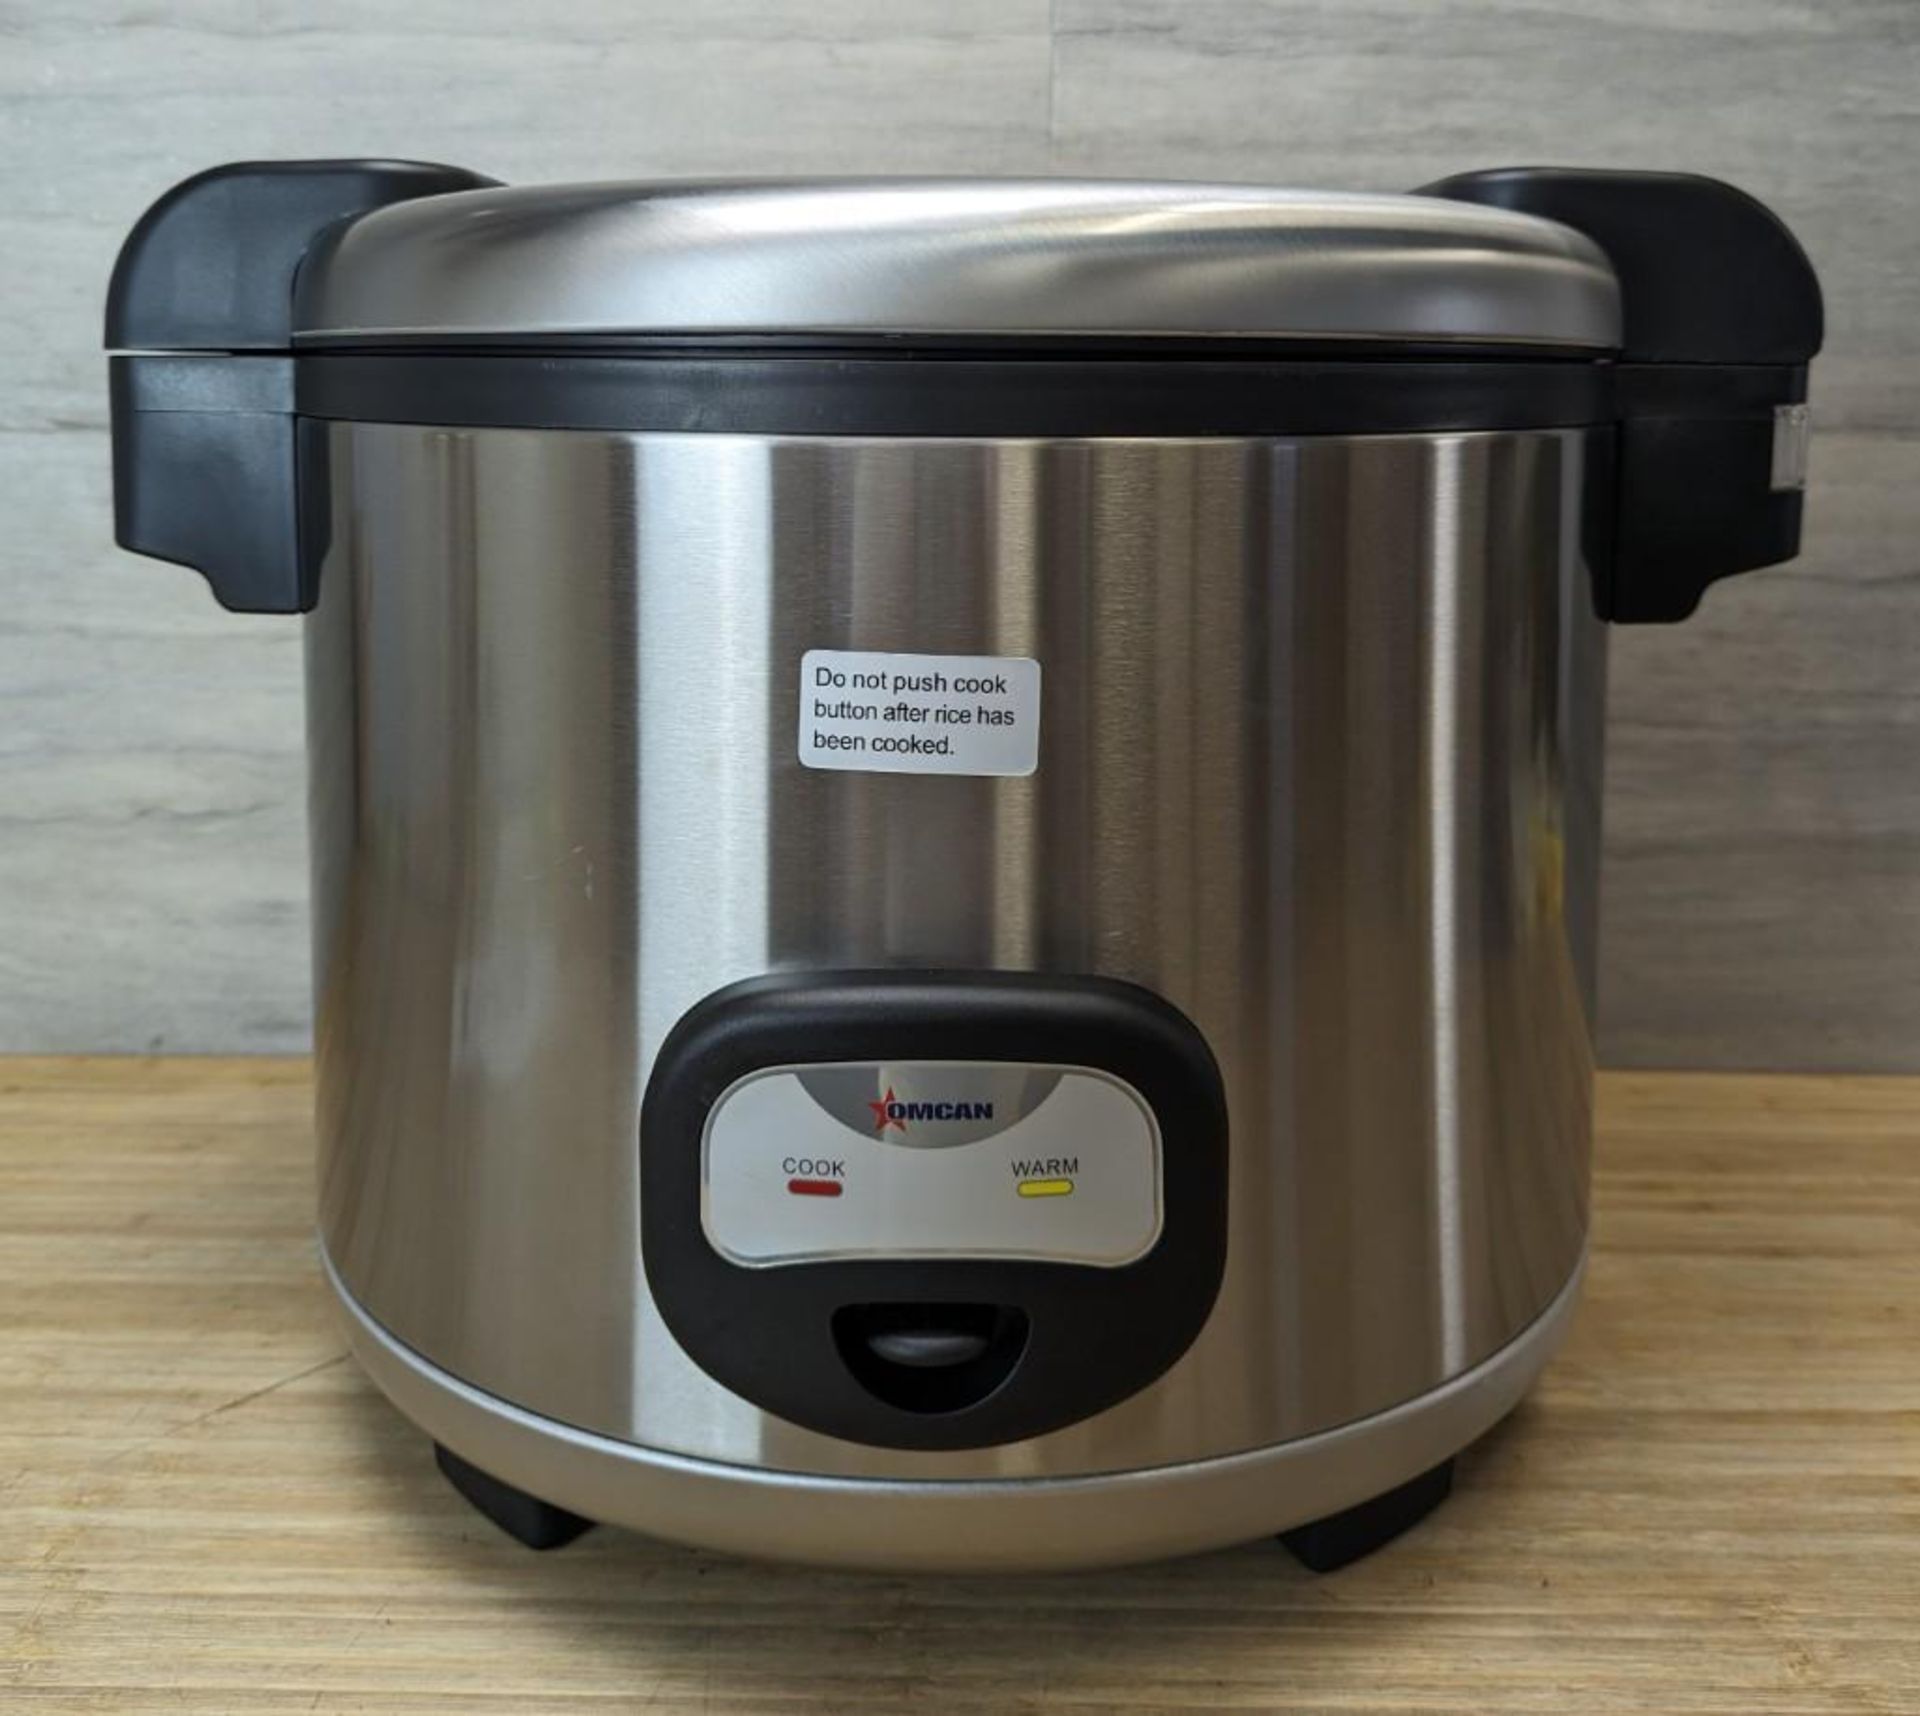 60 CUP COMMERCIAL RICE COOKER/WARMER, OMCAN 39454 - NEW - Image 2 of 10